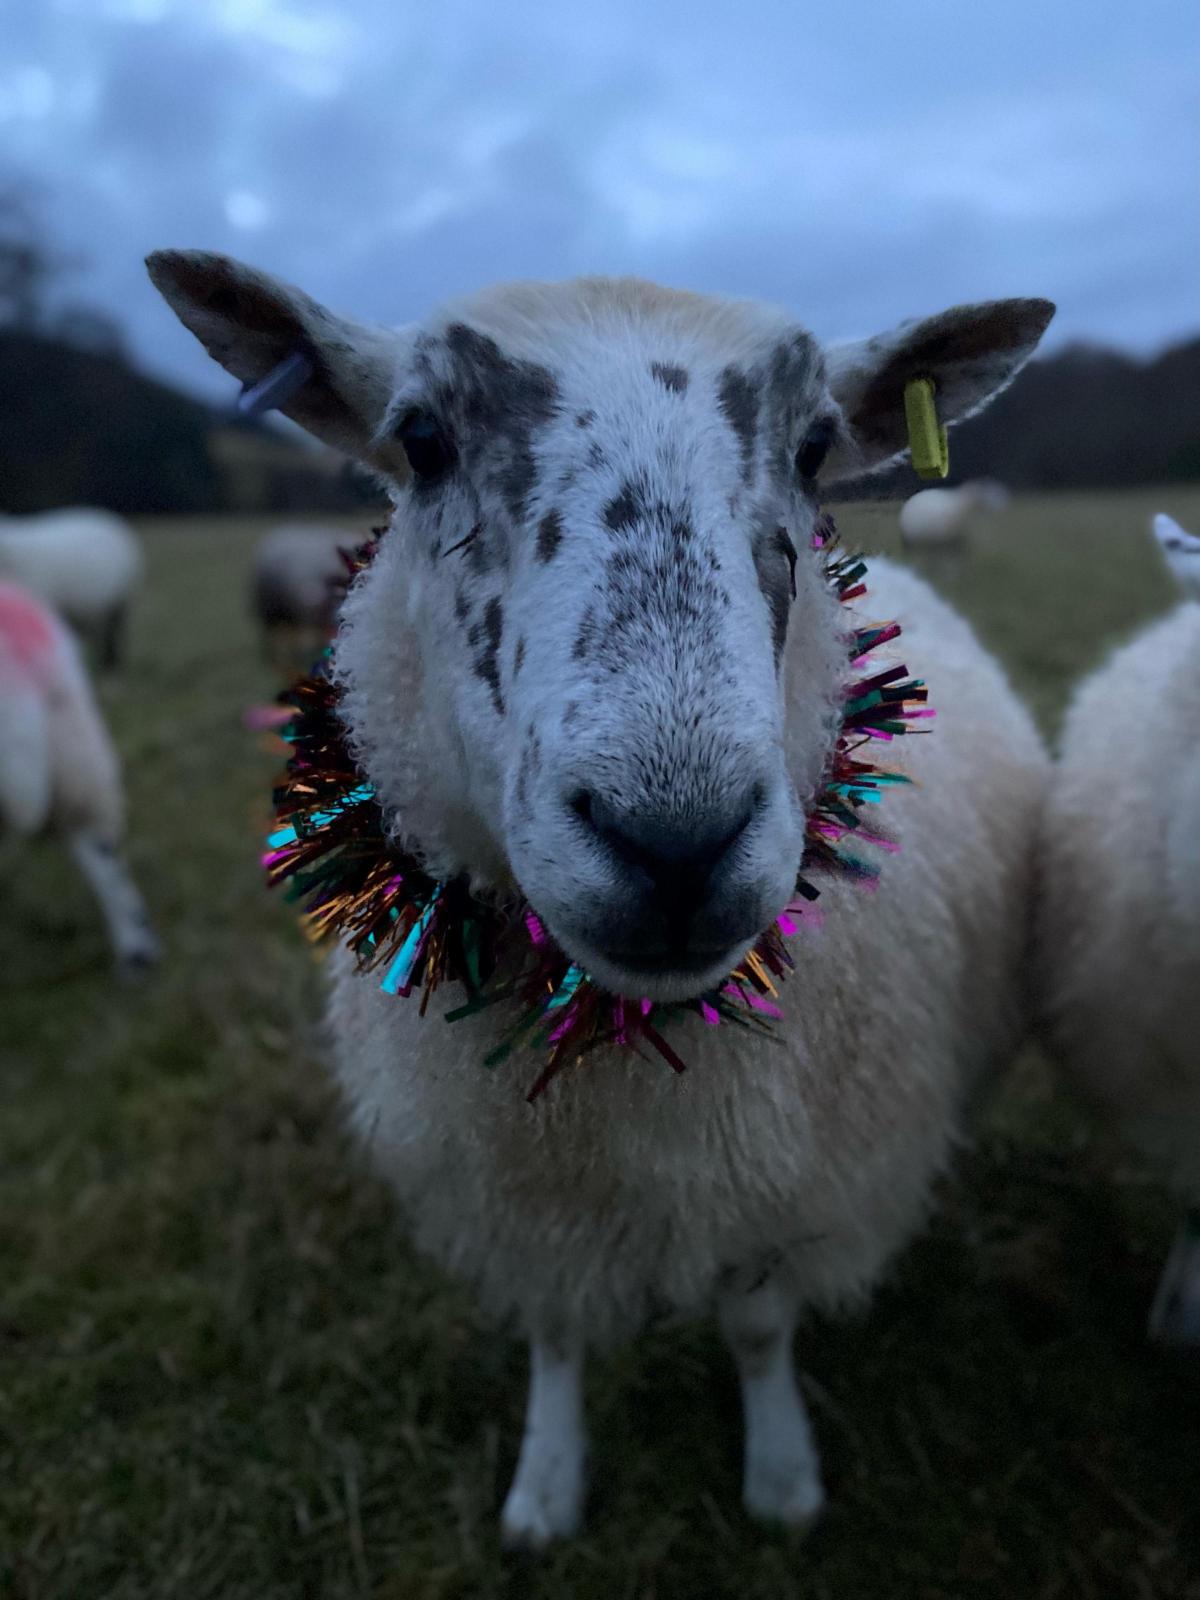 Tyler McKinlay - One of my pet sheep whitey exited at Christmas time